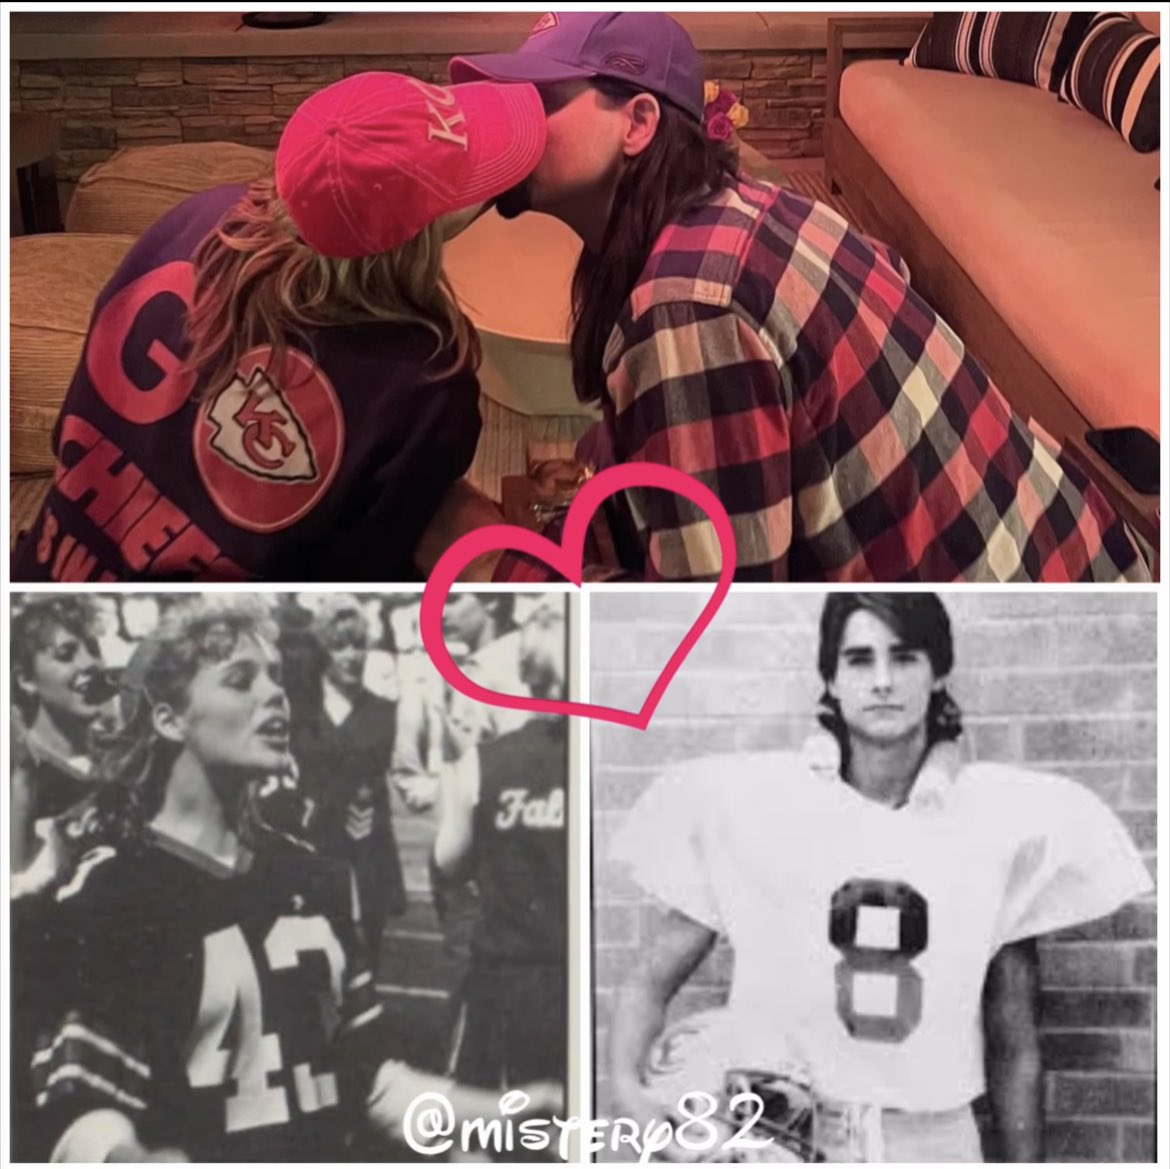 Since the beginning it’s a football love! Happy 23 to the best @kevinrichardson @KristinKayPhoto ❤️🏈❤️ enjoy your ride around the sun !  Love and light!